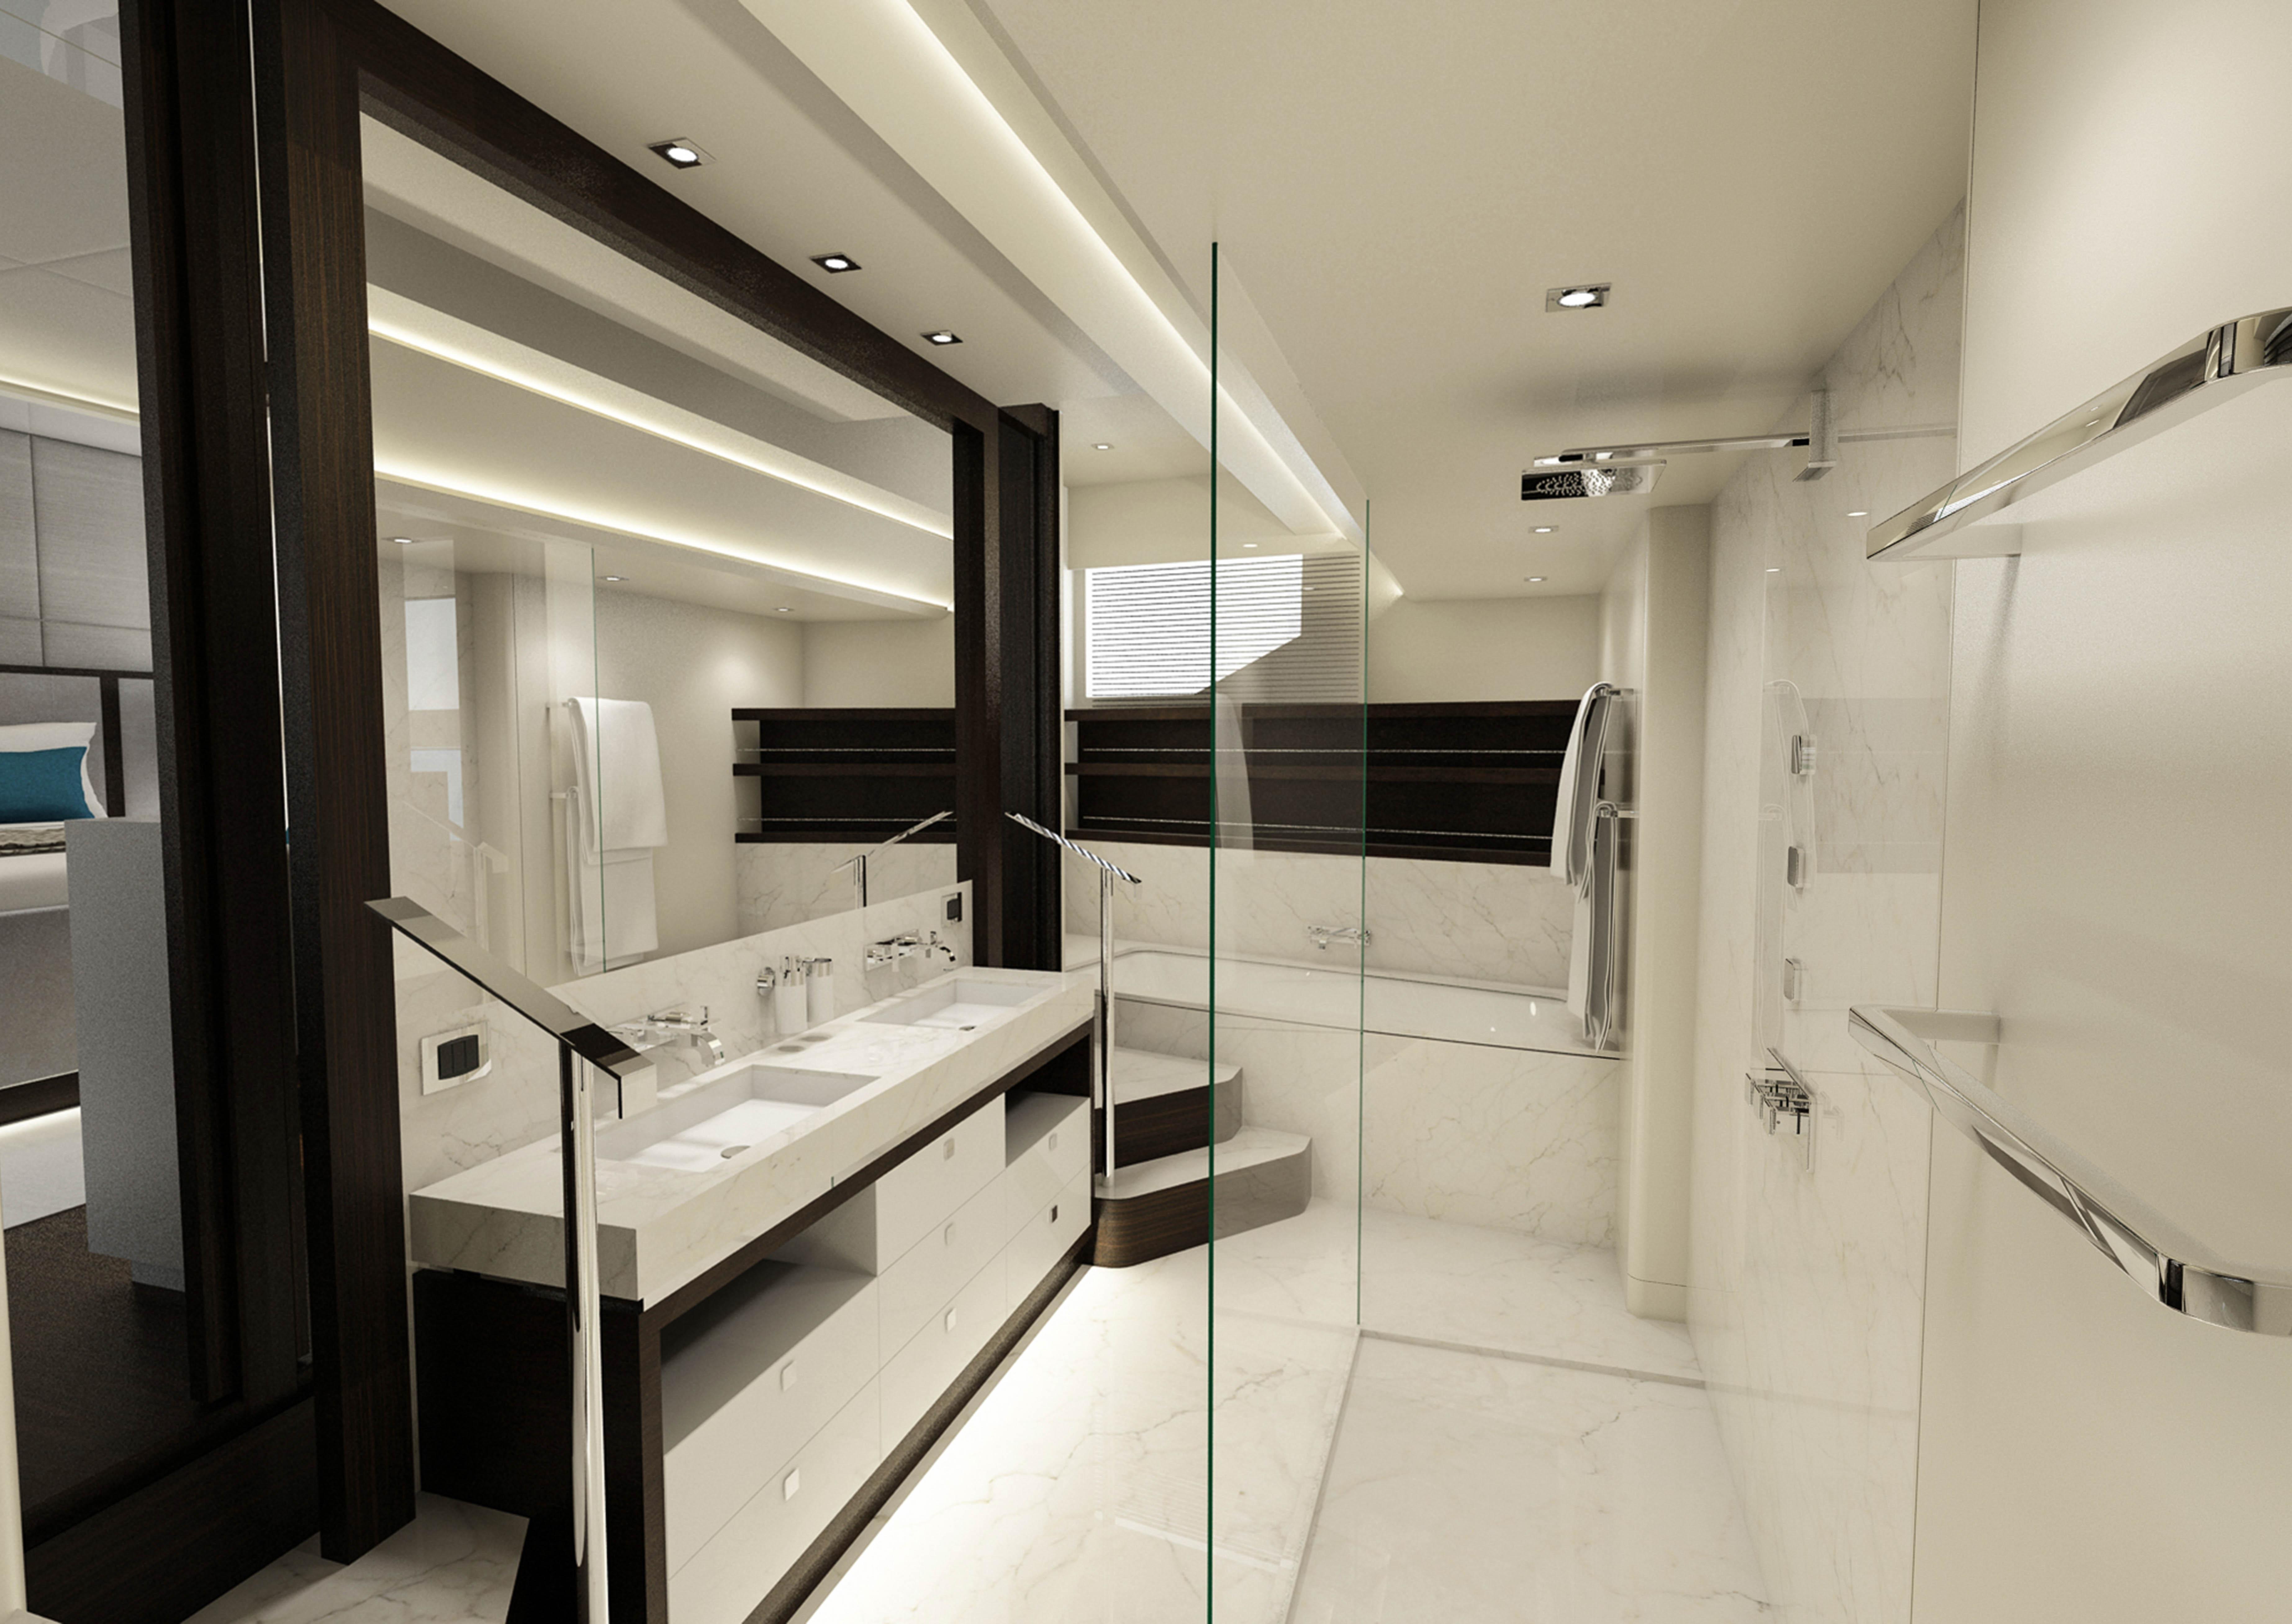  Yacht Photos Pics Manufacturer Provided Image: Sunseeker 116 Yacht Master En Suite